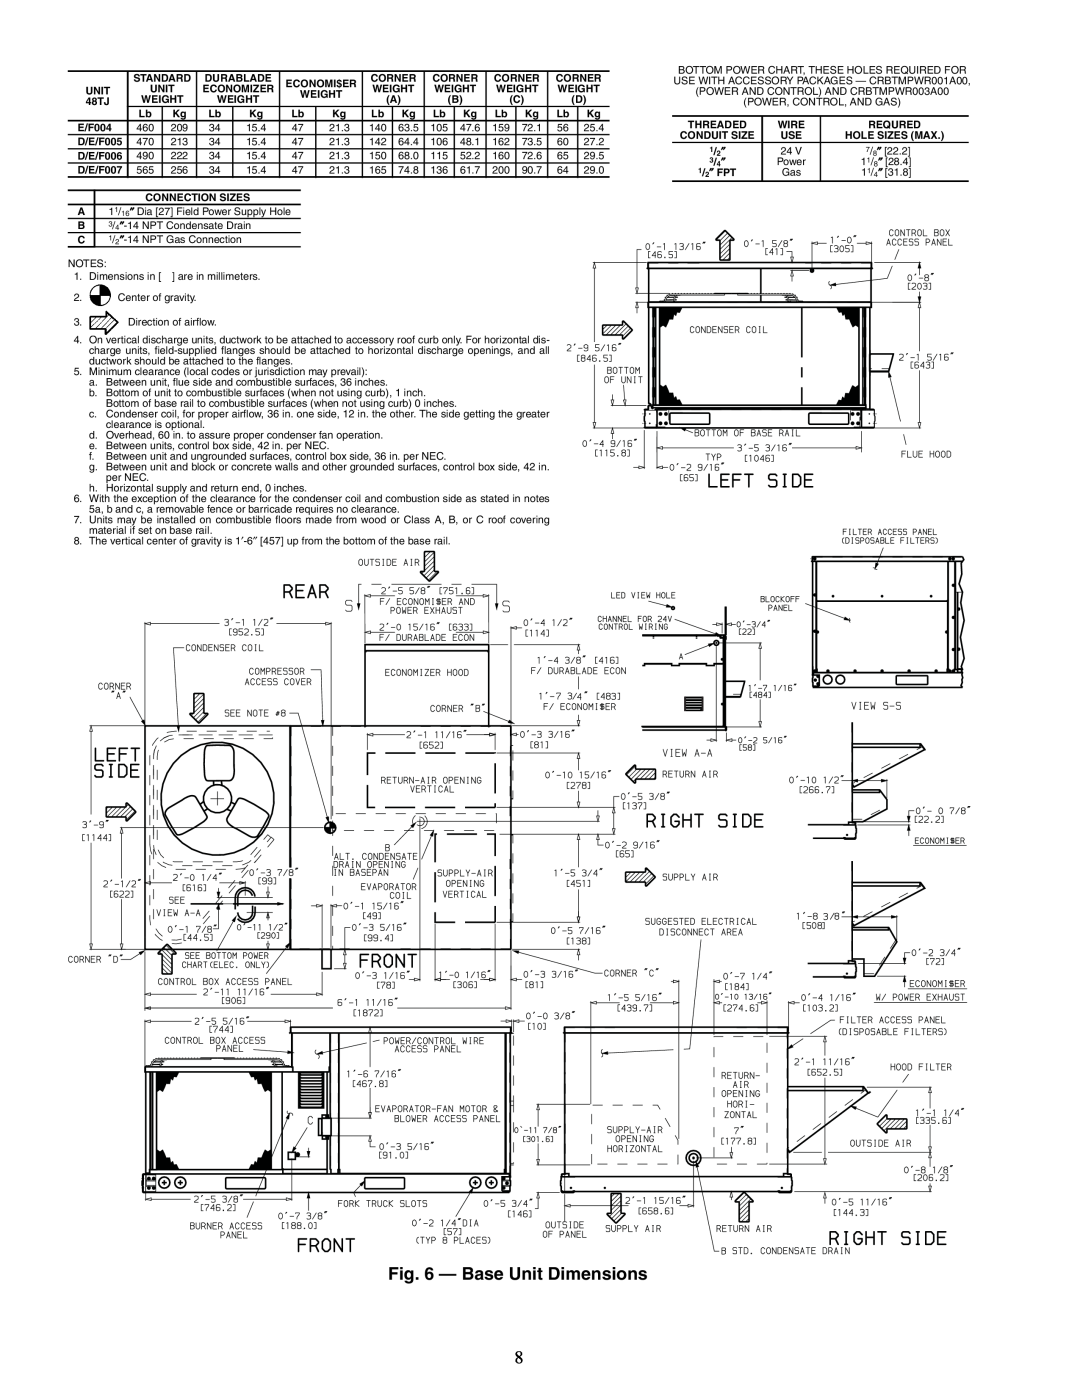 Carrier 48TJD, TJF004, TJF005-007, 48TJE specifications Base Unit Dimensions 